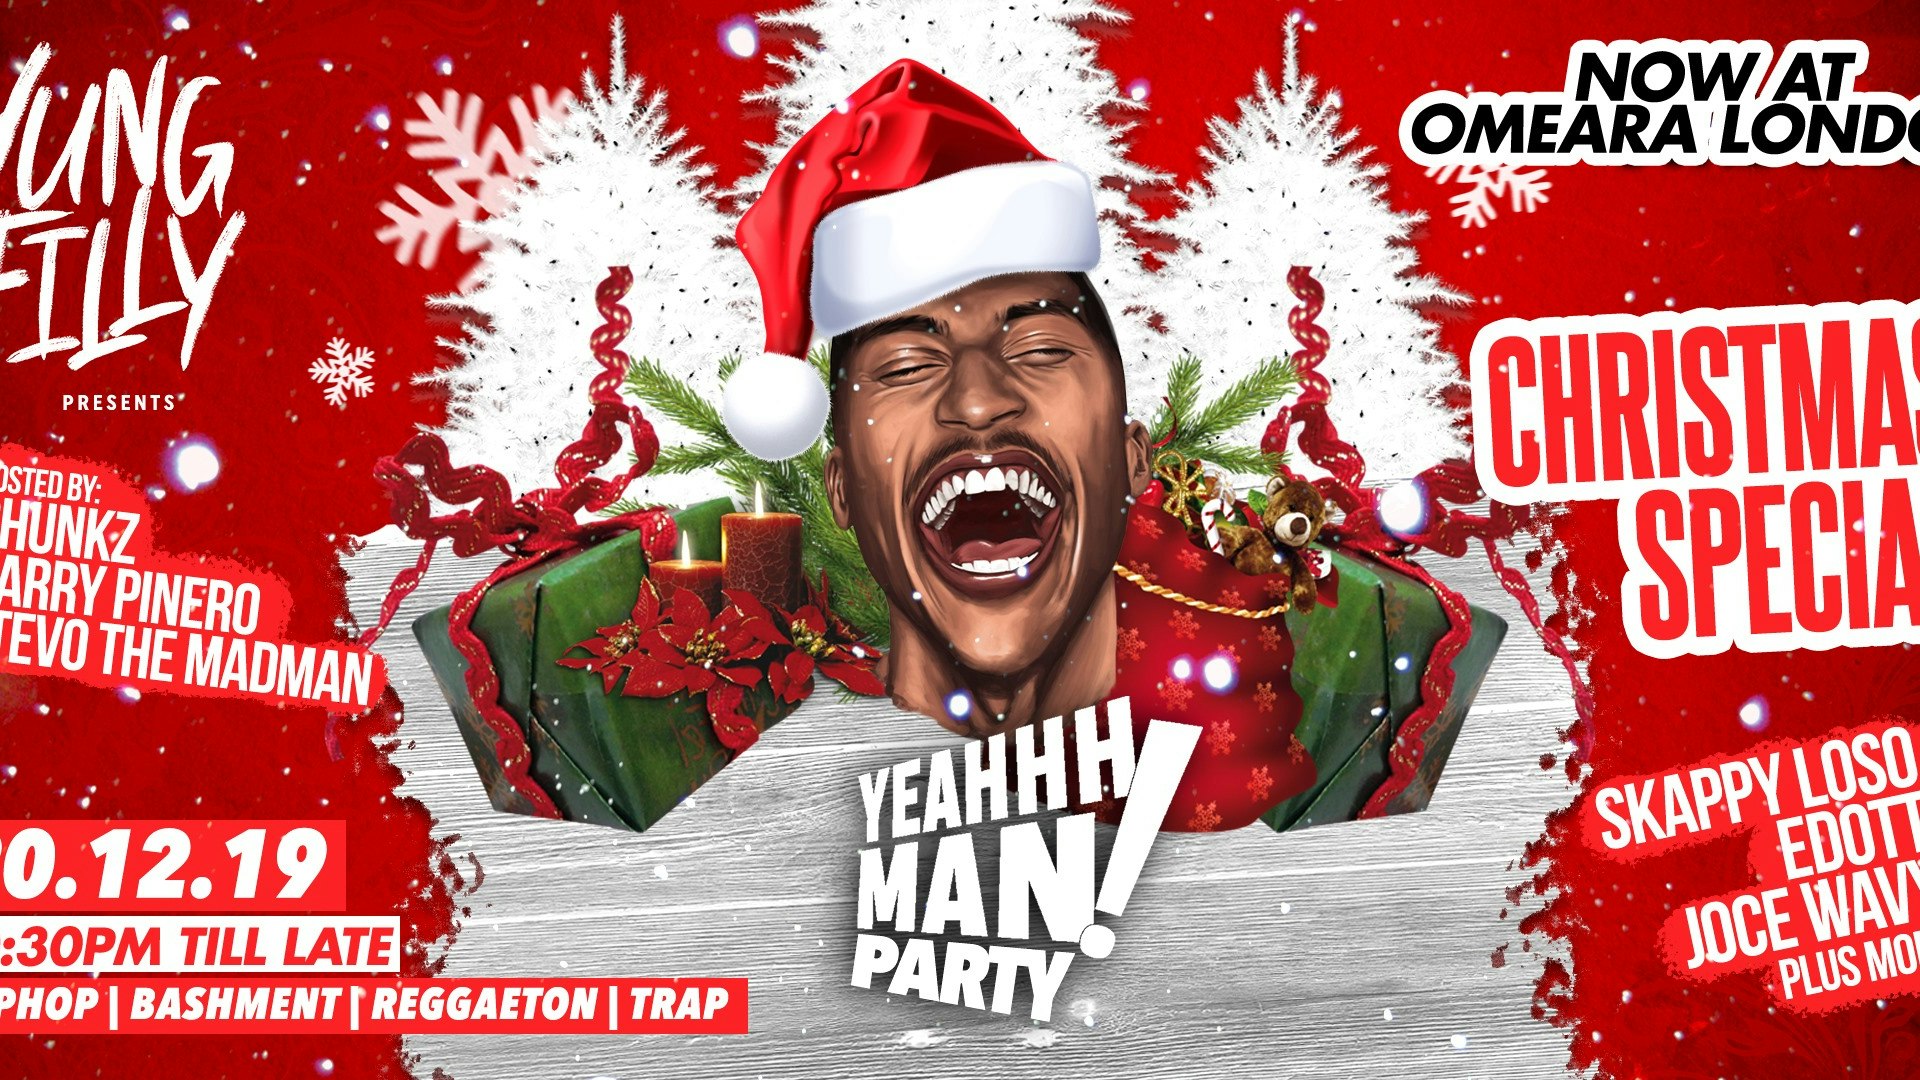 Yung Filly Presents: YeahhhMan Christmas Party + Special Guests – Hosted by Chunkz, Harry Pinero & Stevo The Madman!